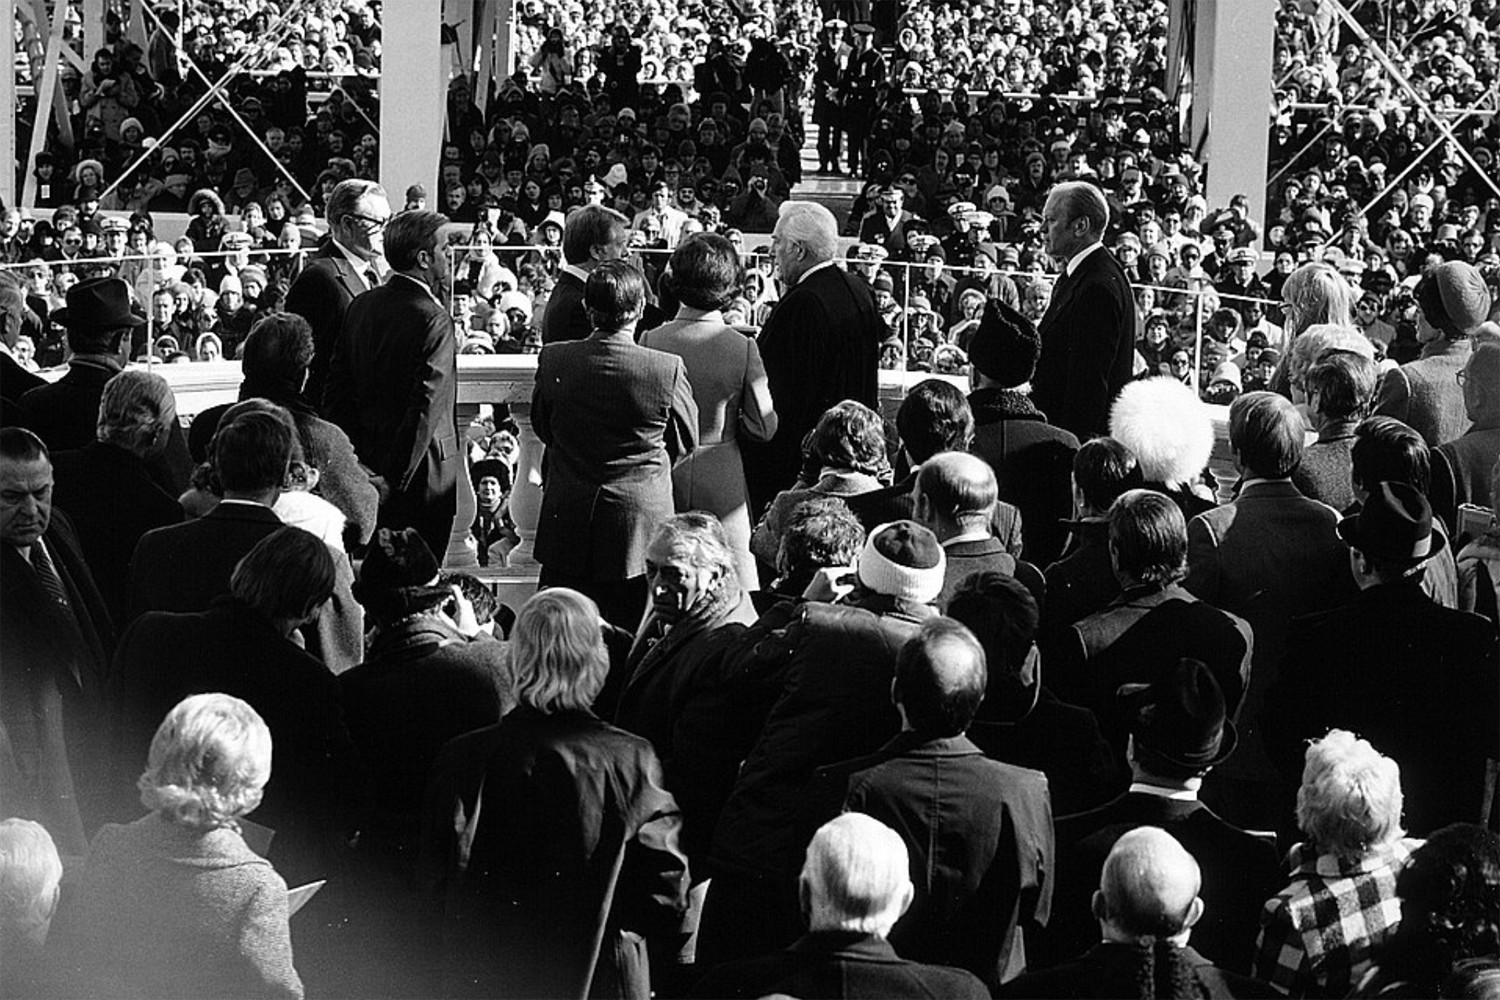 After the failure of Nixon’s “imperial presidency,” Jimmy Carter’s stroll from the Capitol to the White House sought to project a “man of the people” vibe.